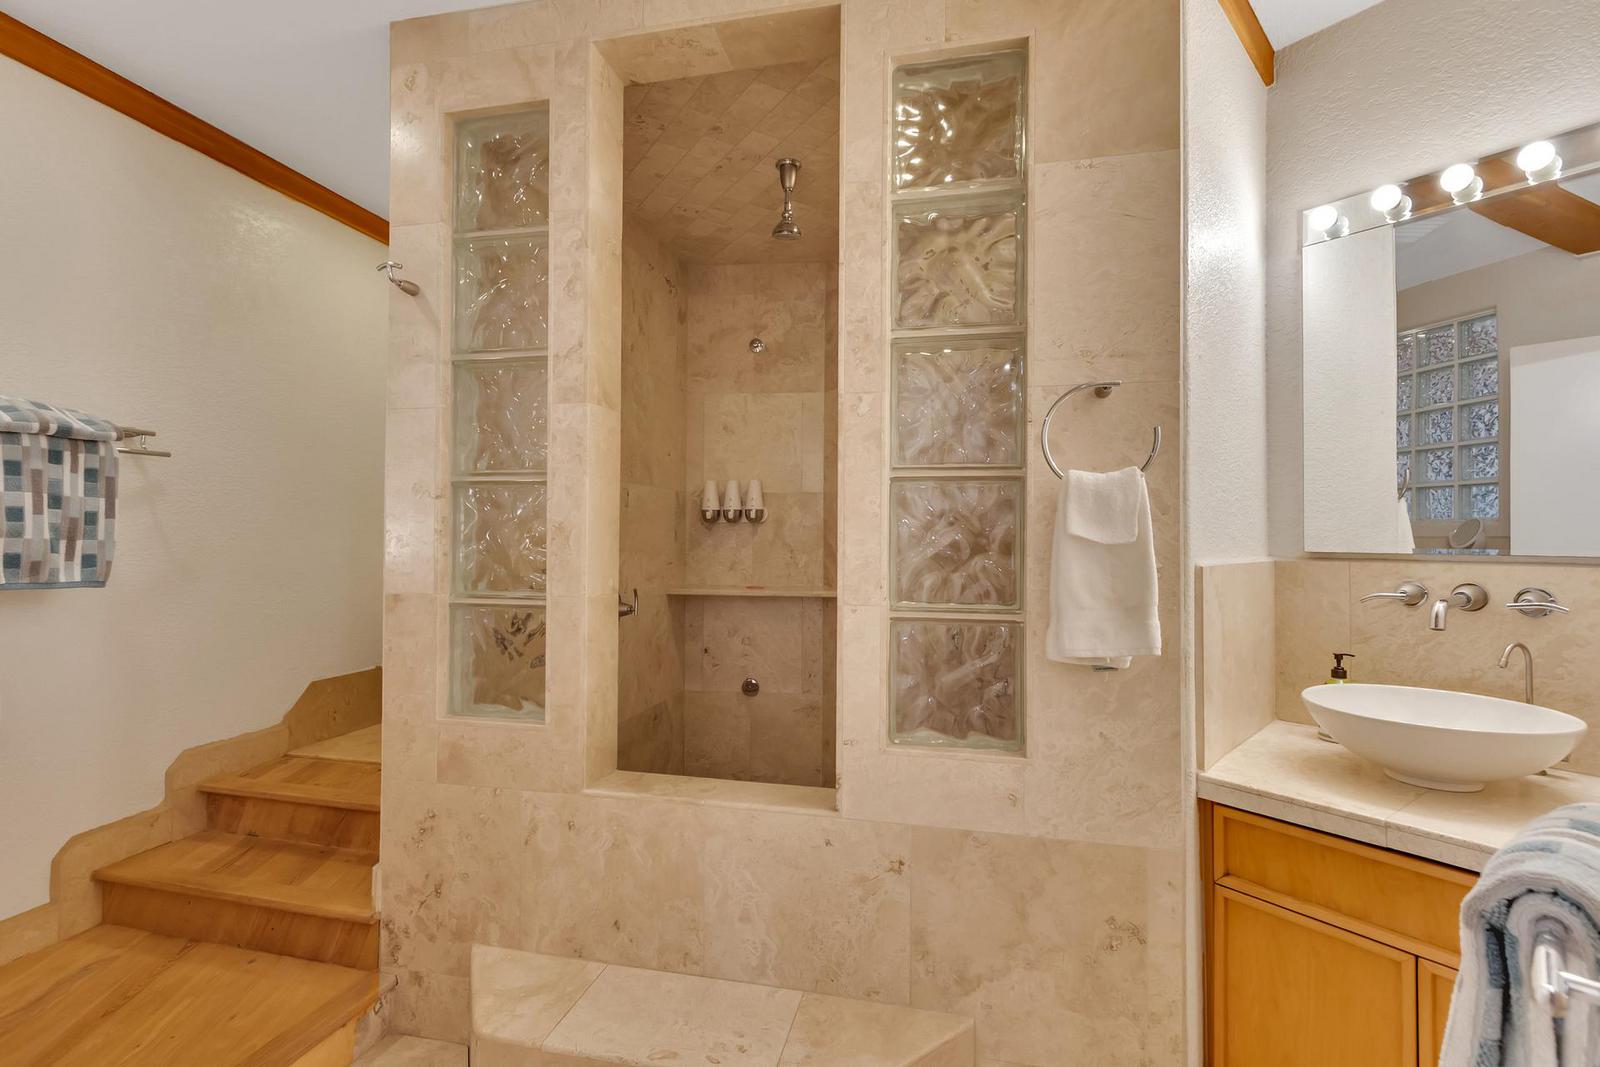 Bathroom and Shower.